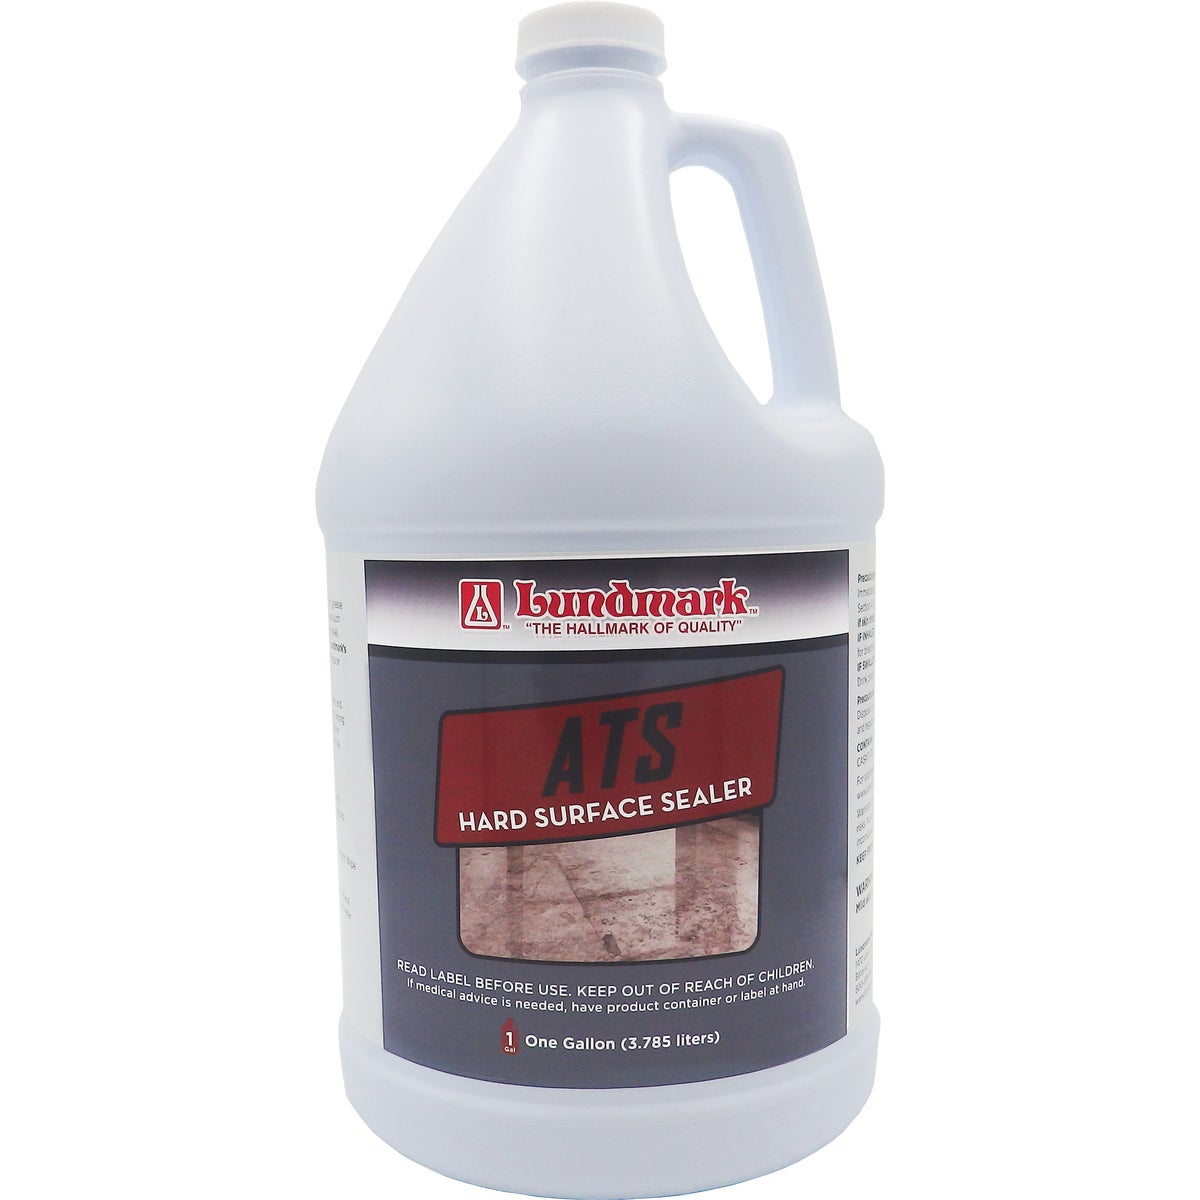 Item 627623, Is a water emulsion resin sealer, primarily formulated to fill and seal the